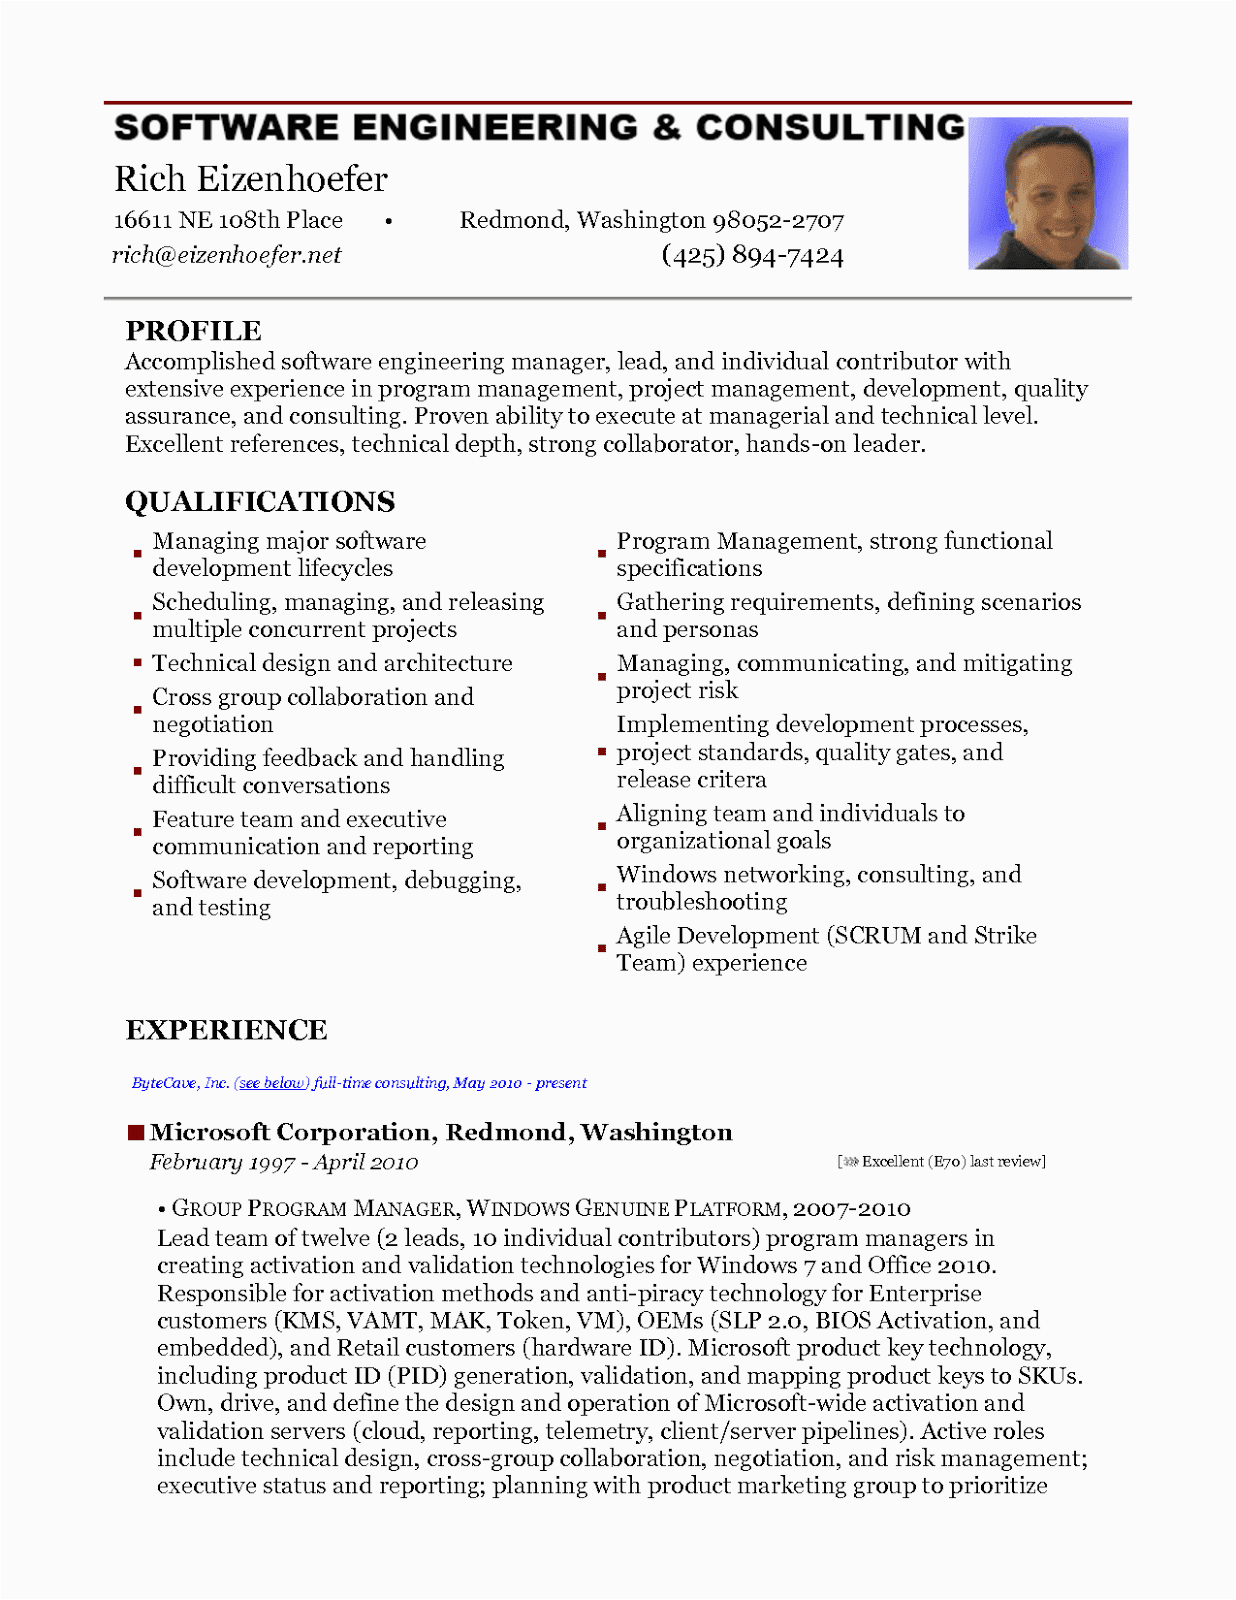 Resume Template for 2 Years Experience 2 Years Experience Resume Scribd India